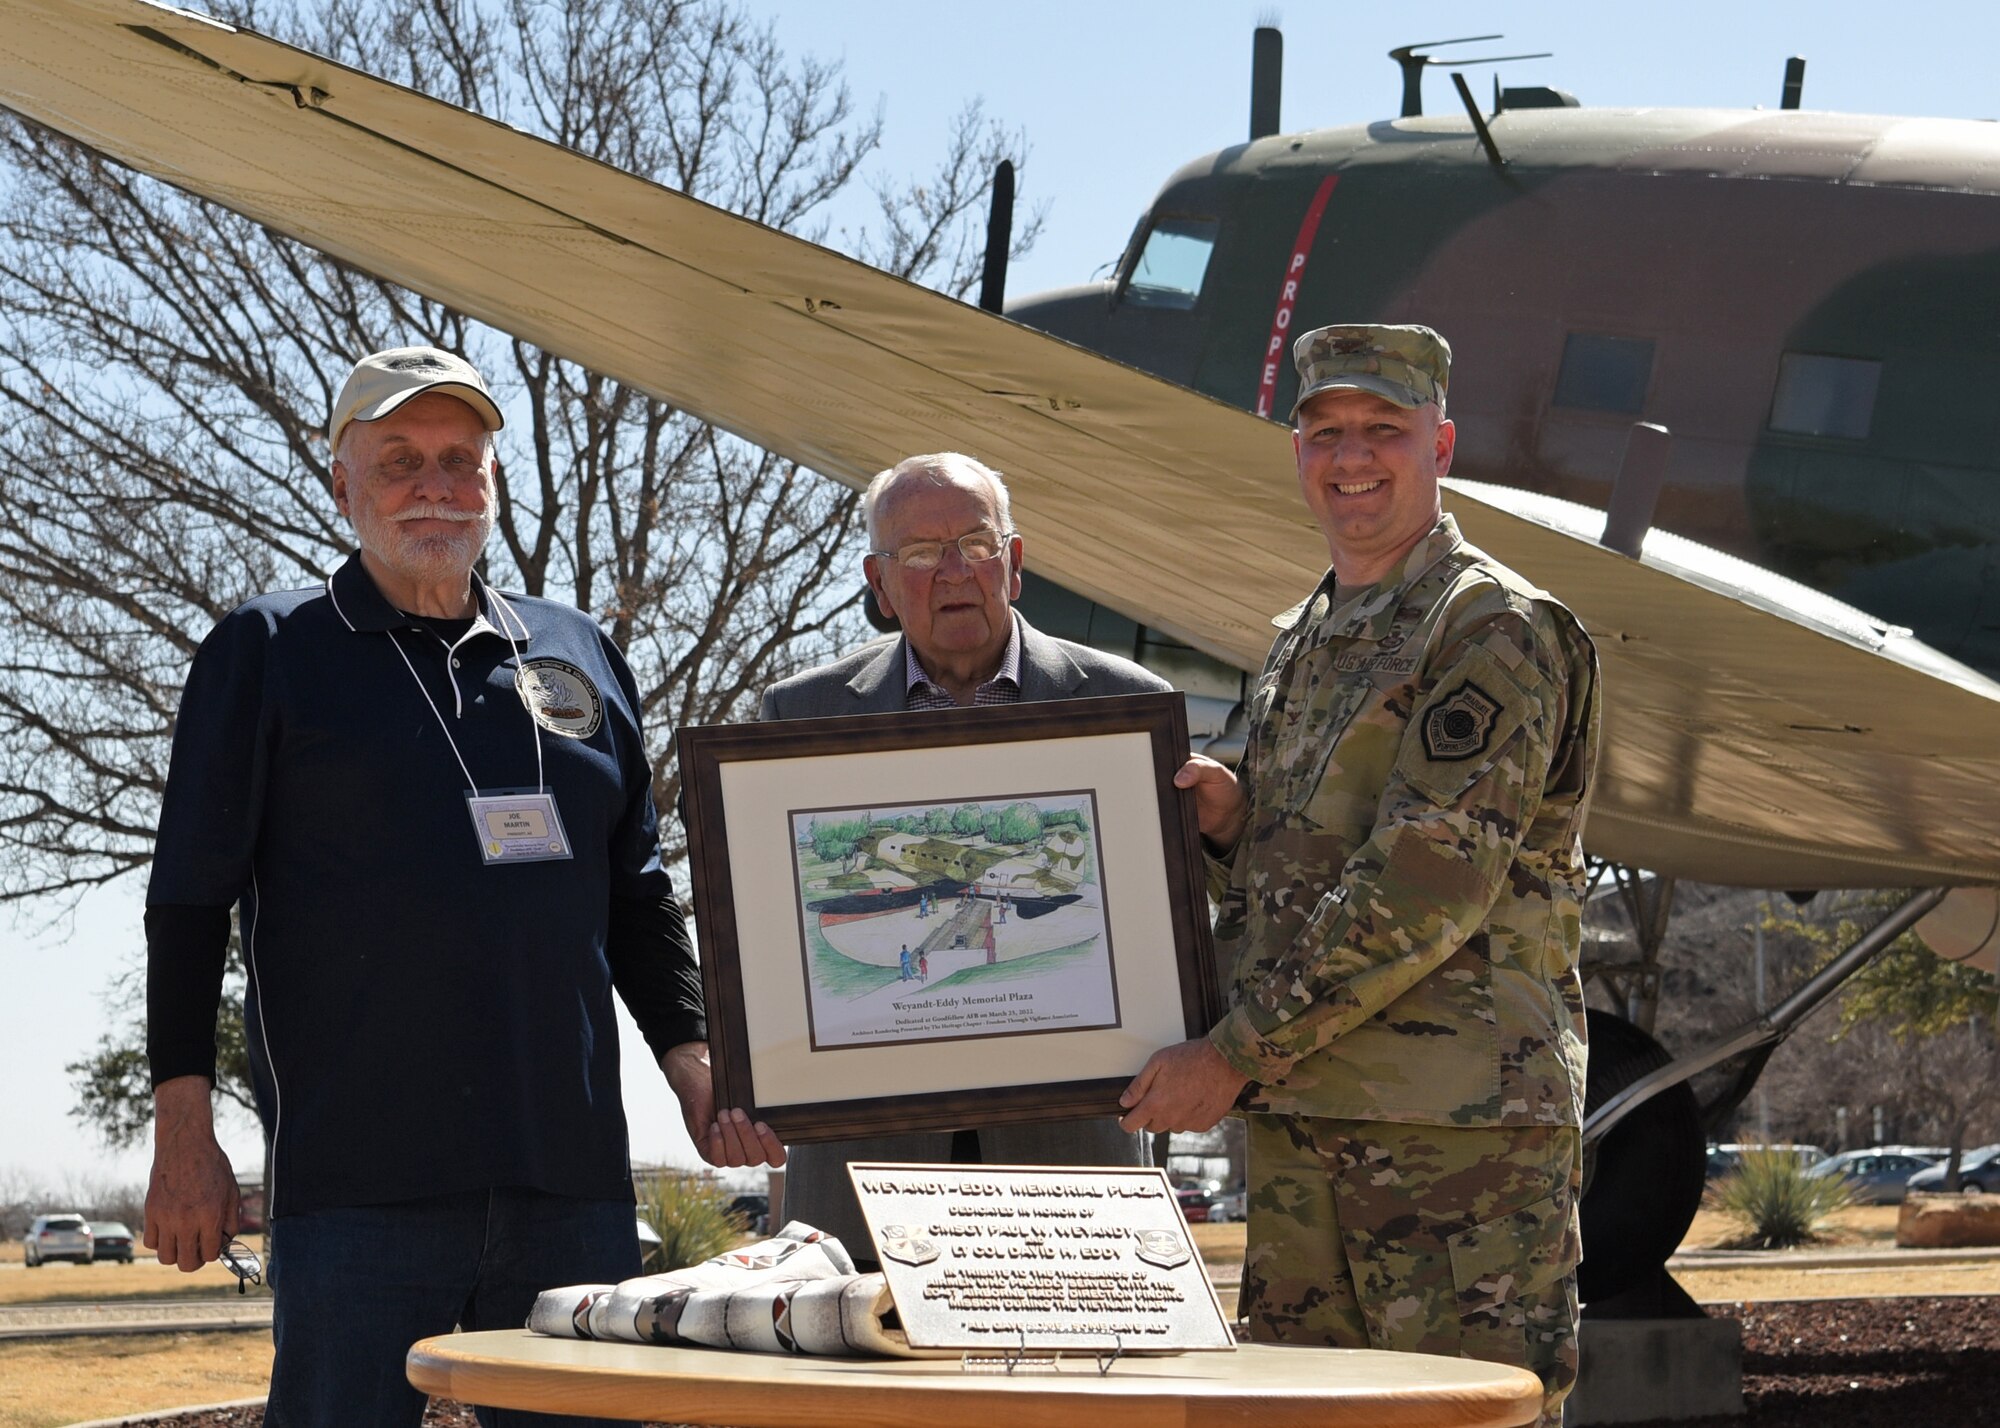 r. Joe Martin, U.S. Air Force veteran, Bill Francis, retired U.S. Air Force chief master sergeant, and Col. Matthew Reilman, 17th Training Wing commander, hold a picture, dedicating the Weyandt-Eddy Memorial Plaza at Goodfellow Air Force Base, Texas, March 25, 2022. The dedication supported the intent of the 17th TRW Heritage Campaign Plan, the 17 TRW Historian Strategic Plan, and the 17 TRW Strategic Plan. (U.S. Air Force photo by Senior Airman Abbey Rieves)